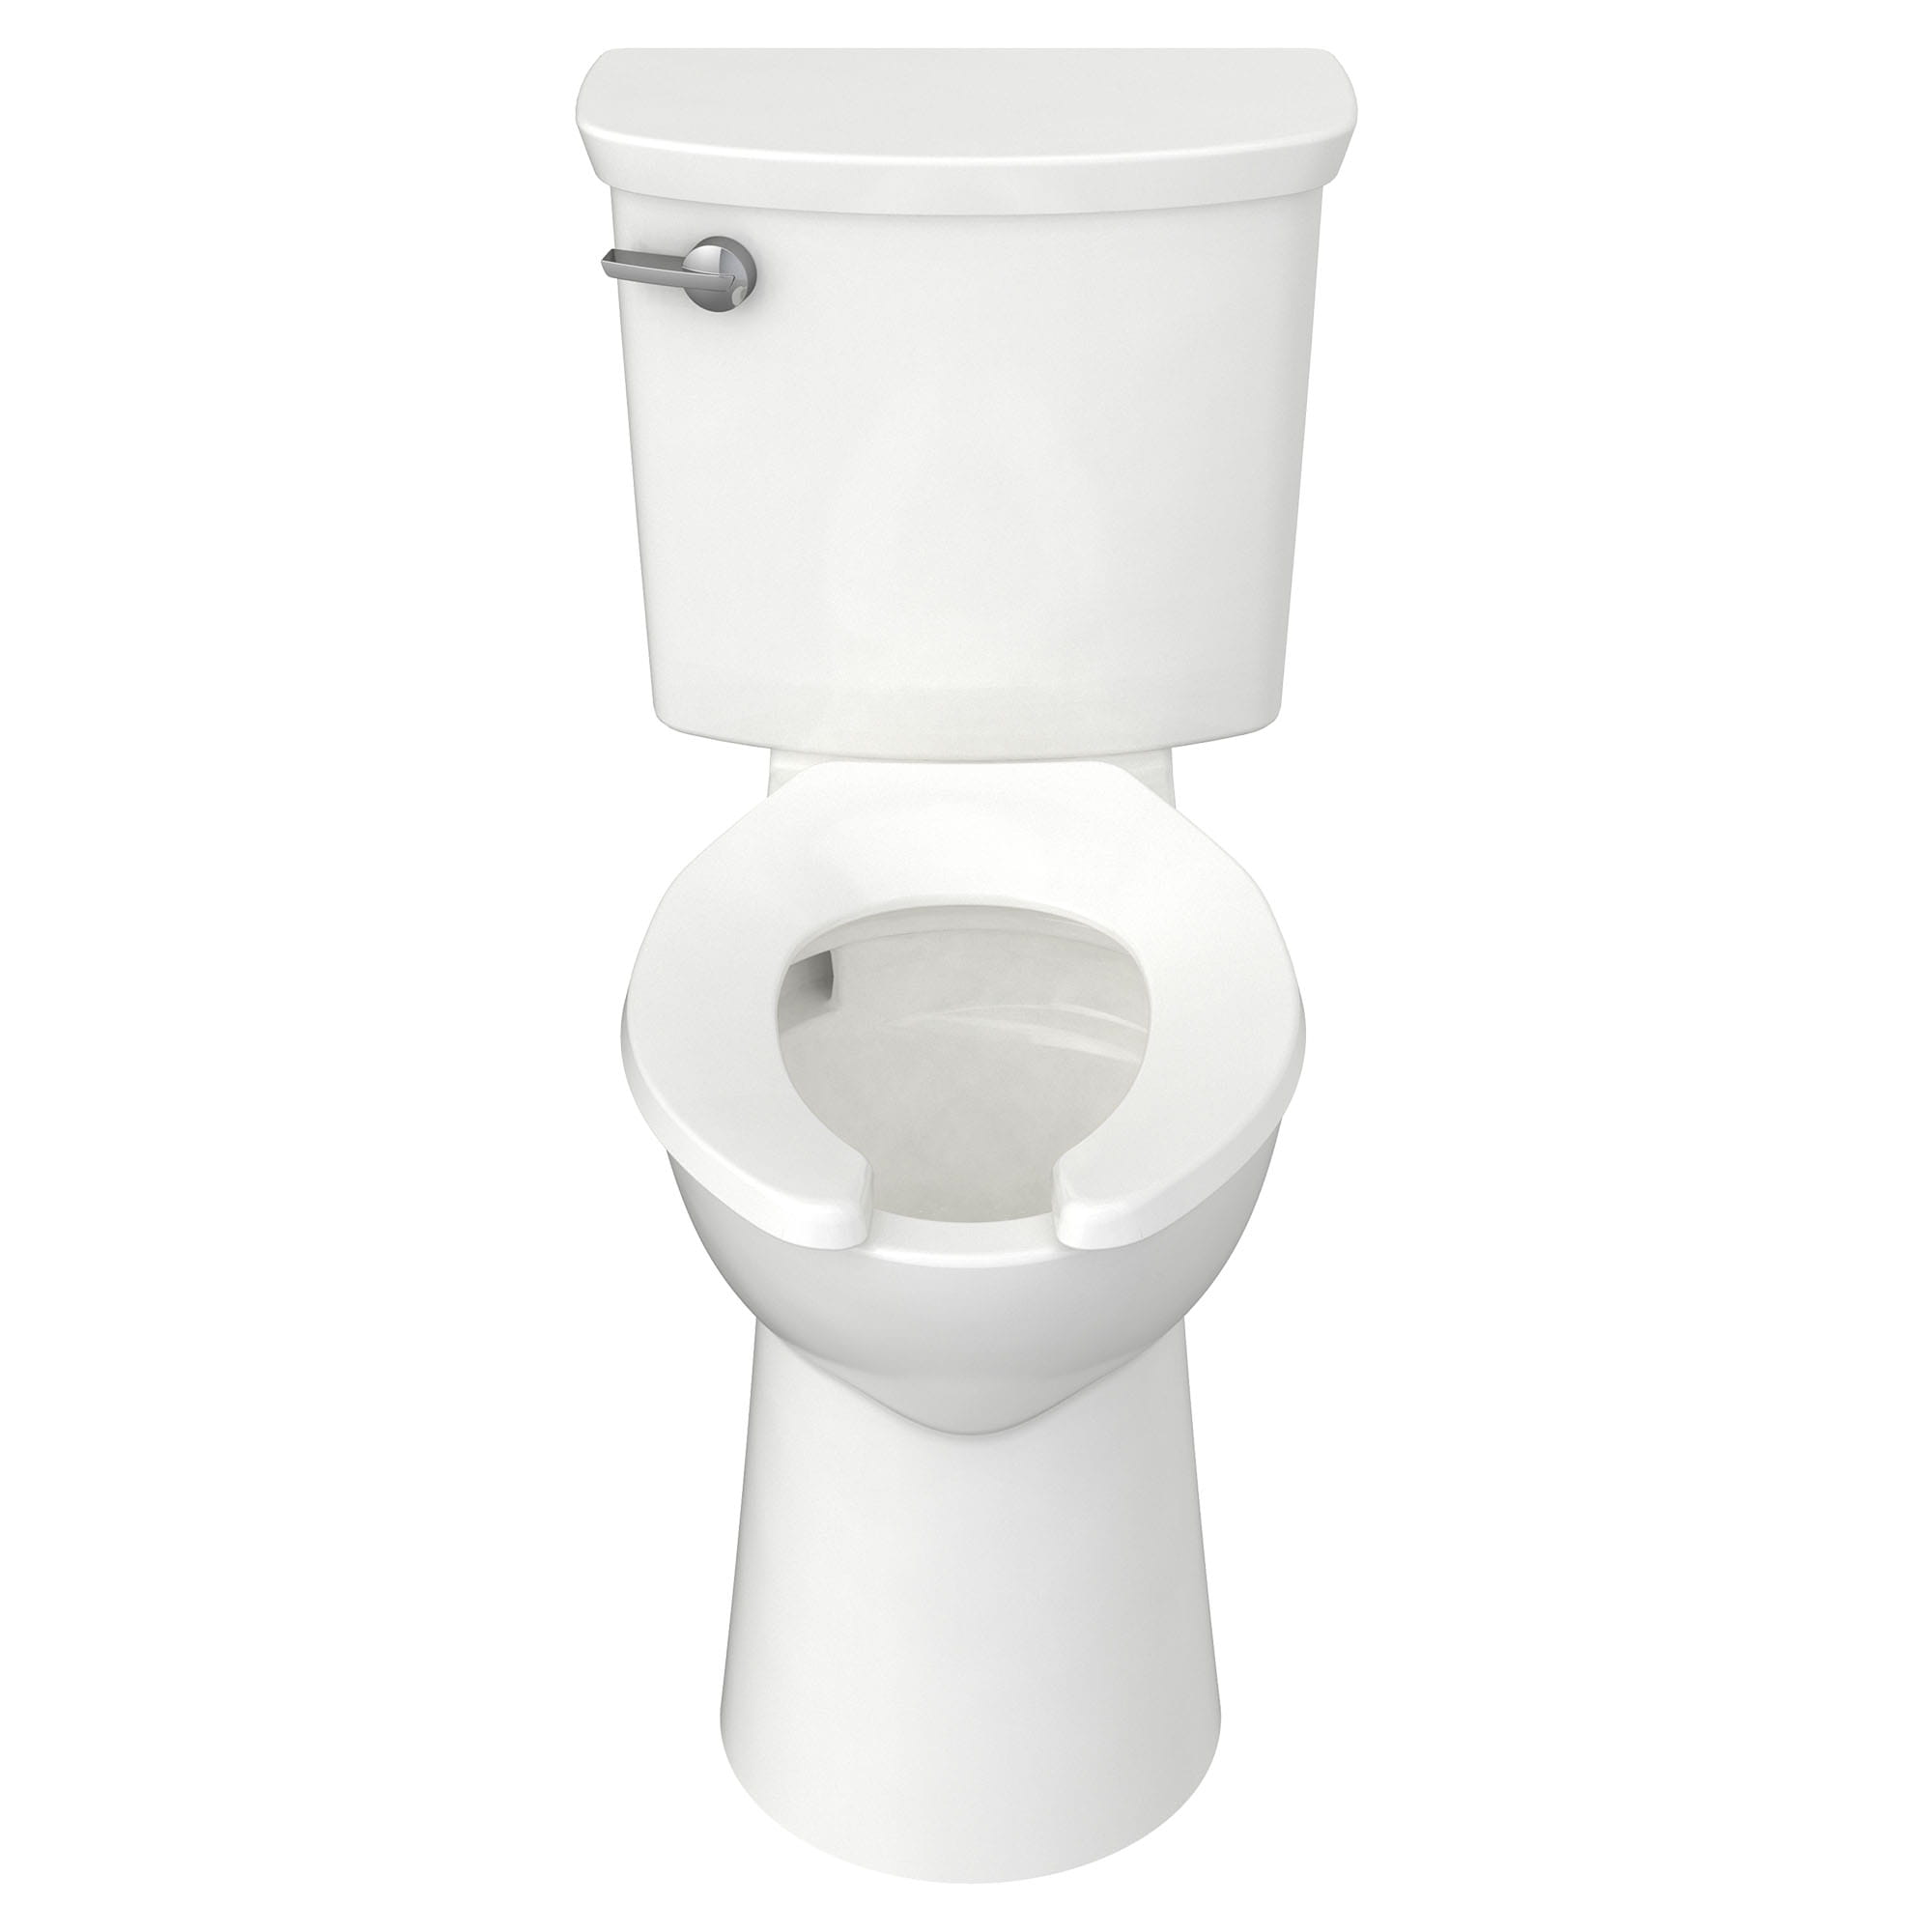 Yorkville™ VorMax® Two-Piece 1.28 gpf/4.8 Lpf Chair Height Back Outlet Elongated EverClean® Toilet